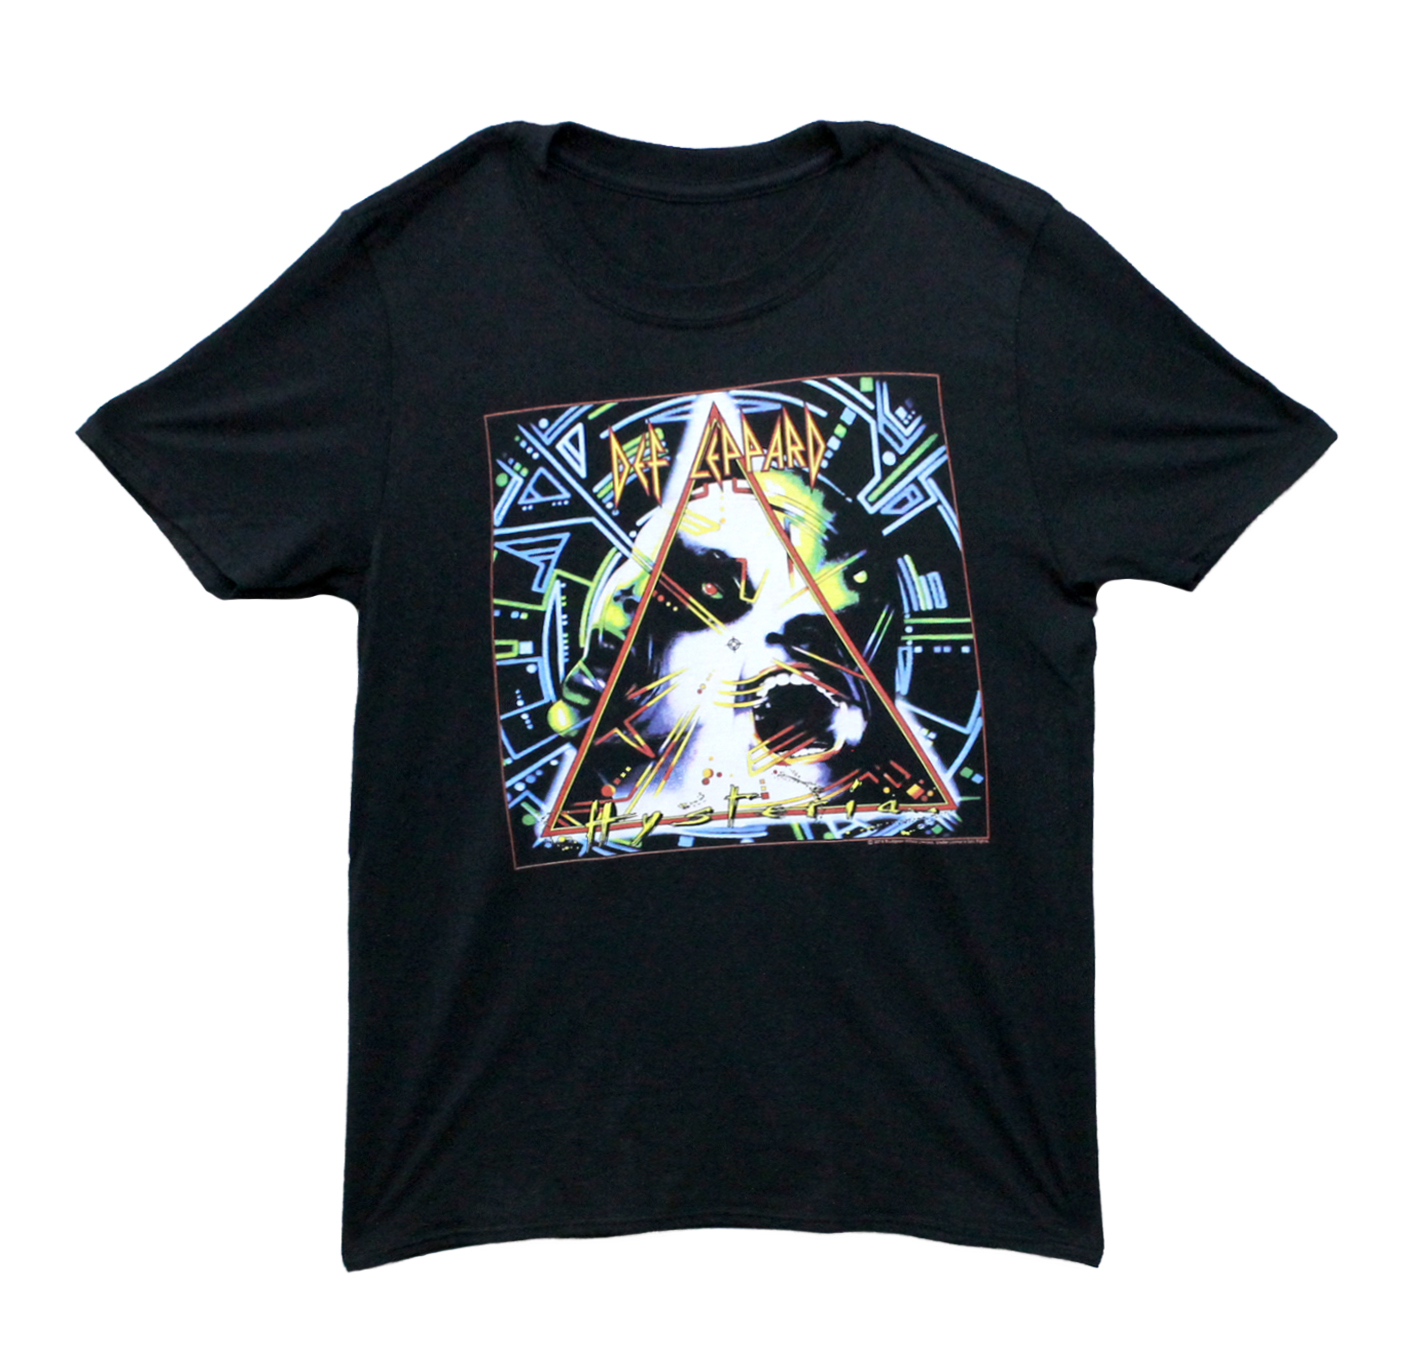 Plus Size Def Leppard Graphic Band T-Shirt